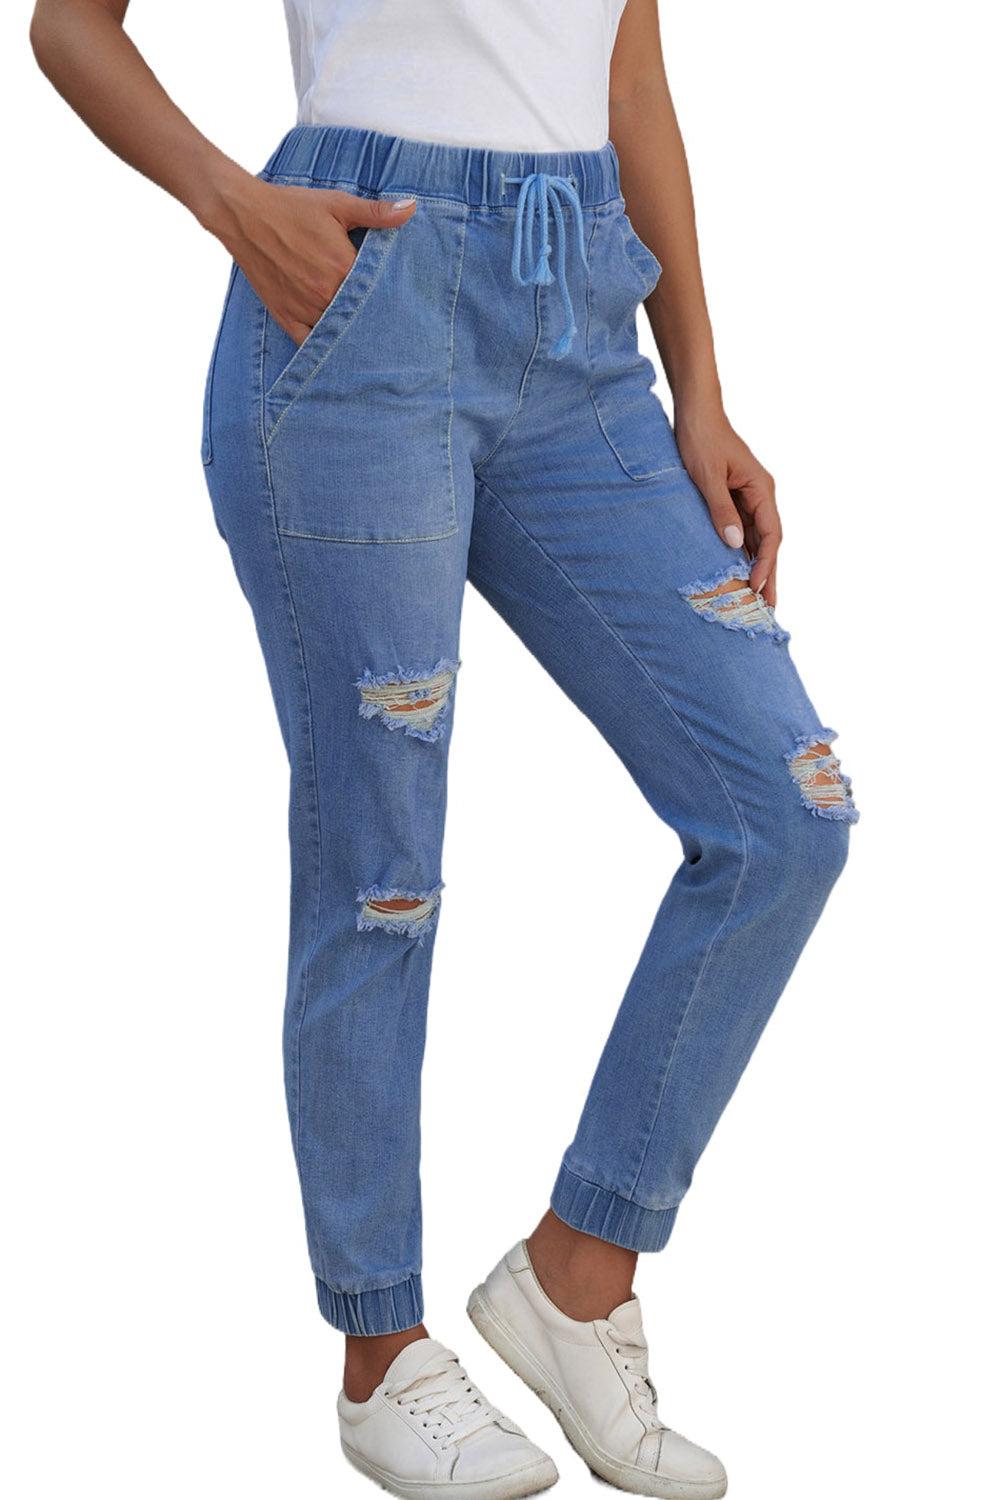 Sky Blue Pocketed Distressed Denim Joggers  Denim joggers, Denim pants  women, Distressed denim